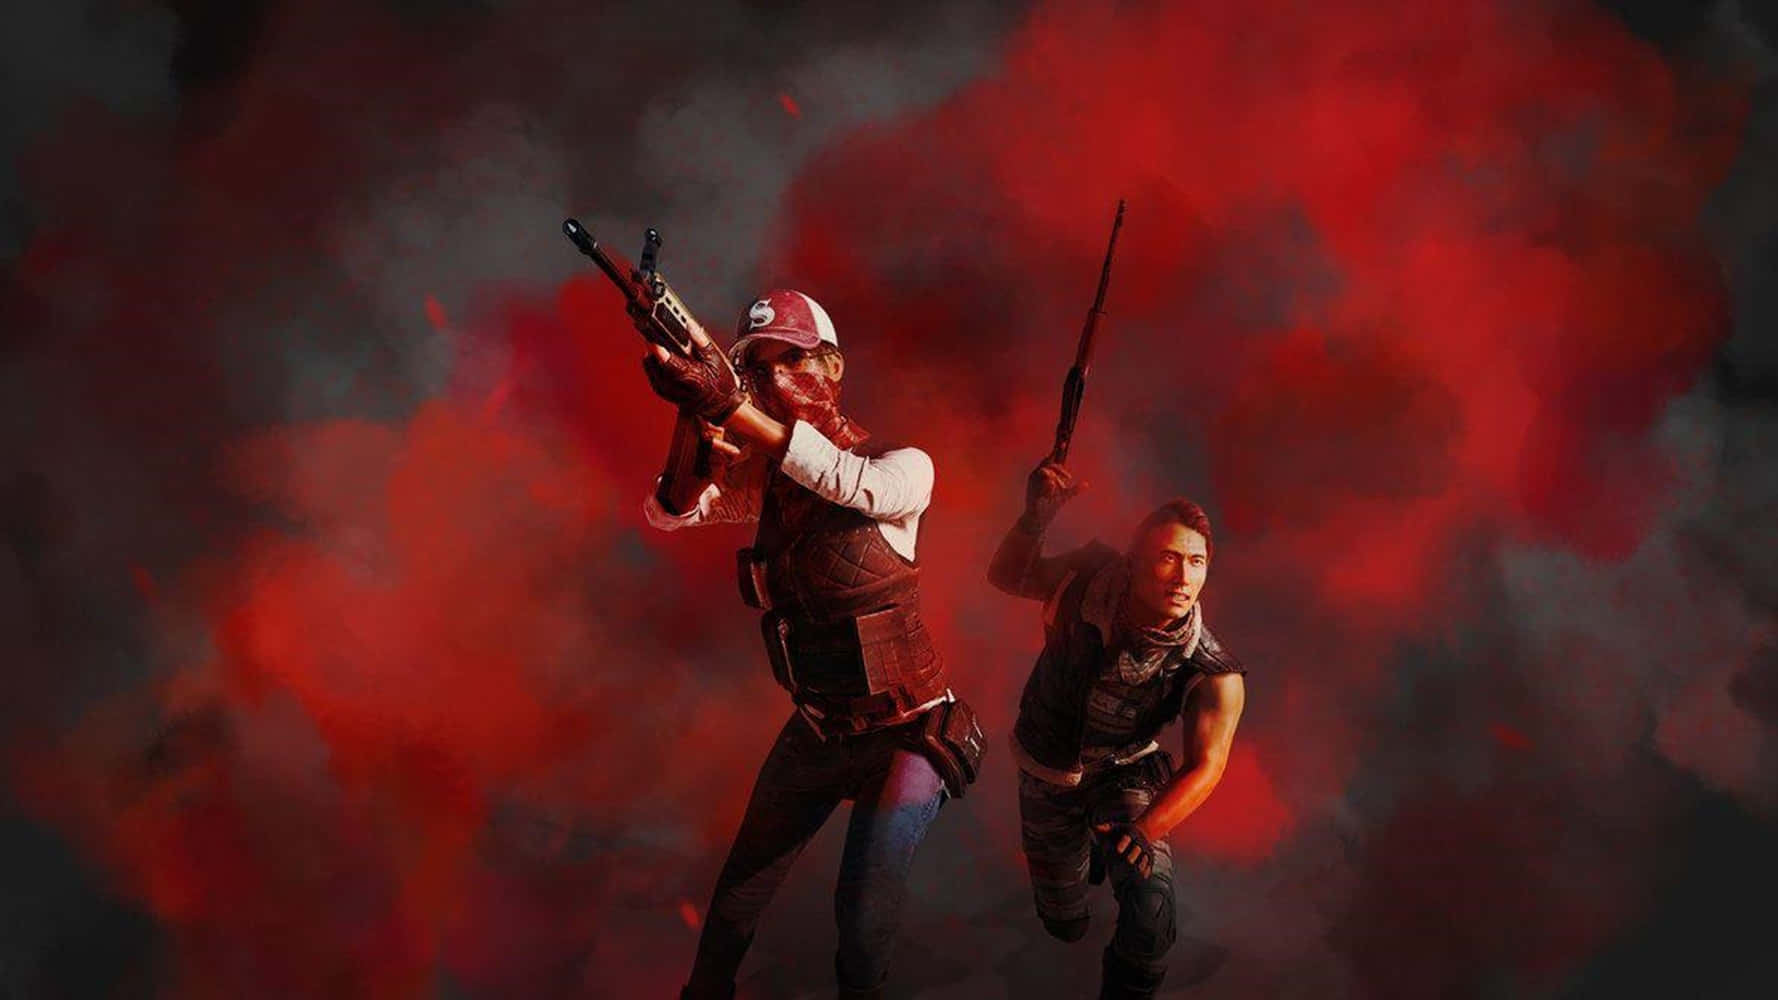 Two Men With Guns In Front Of A Red Background Wallpaper